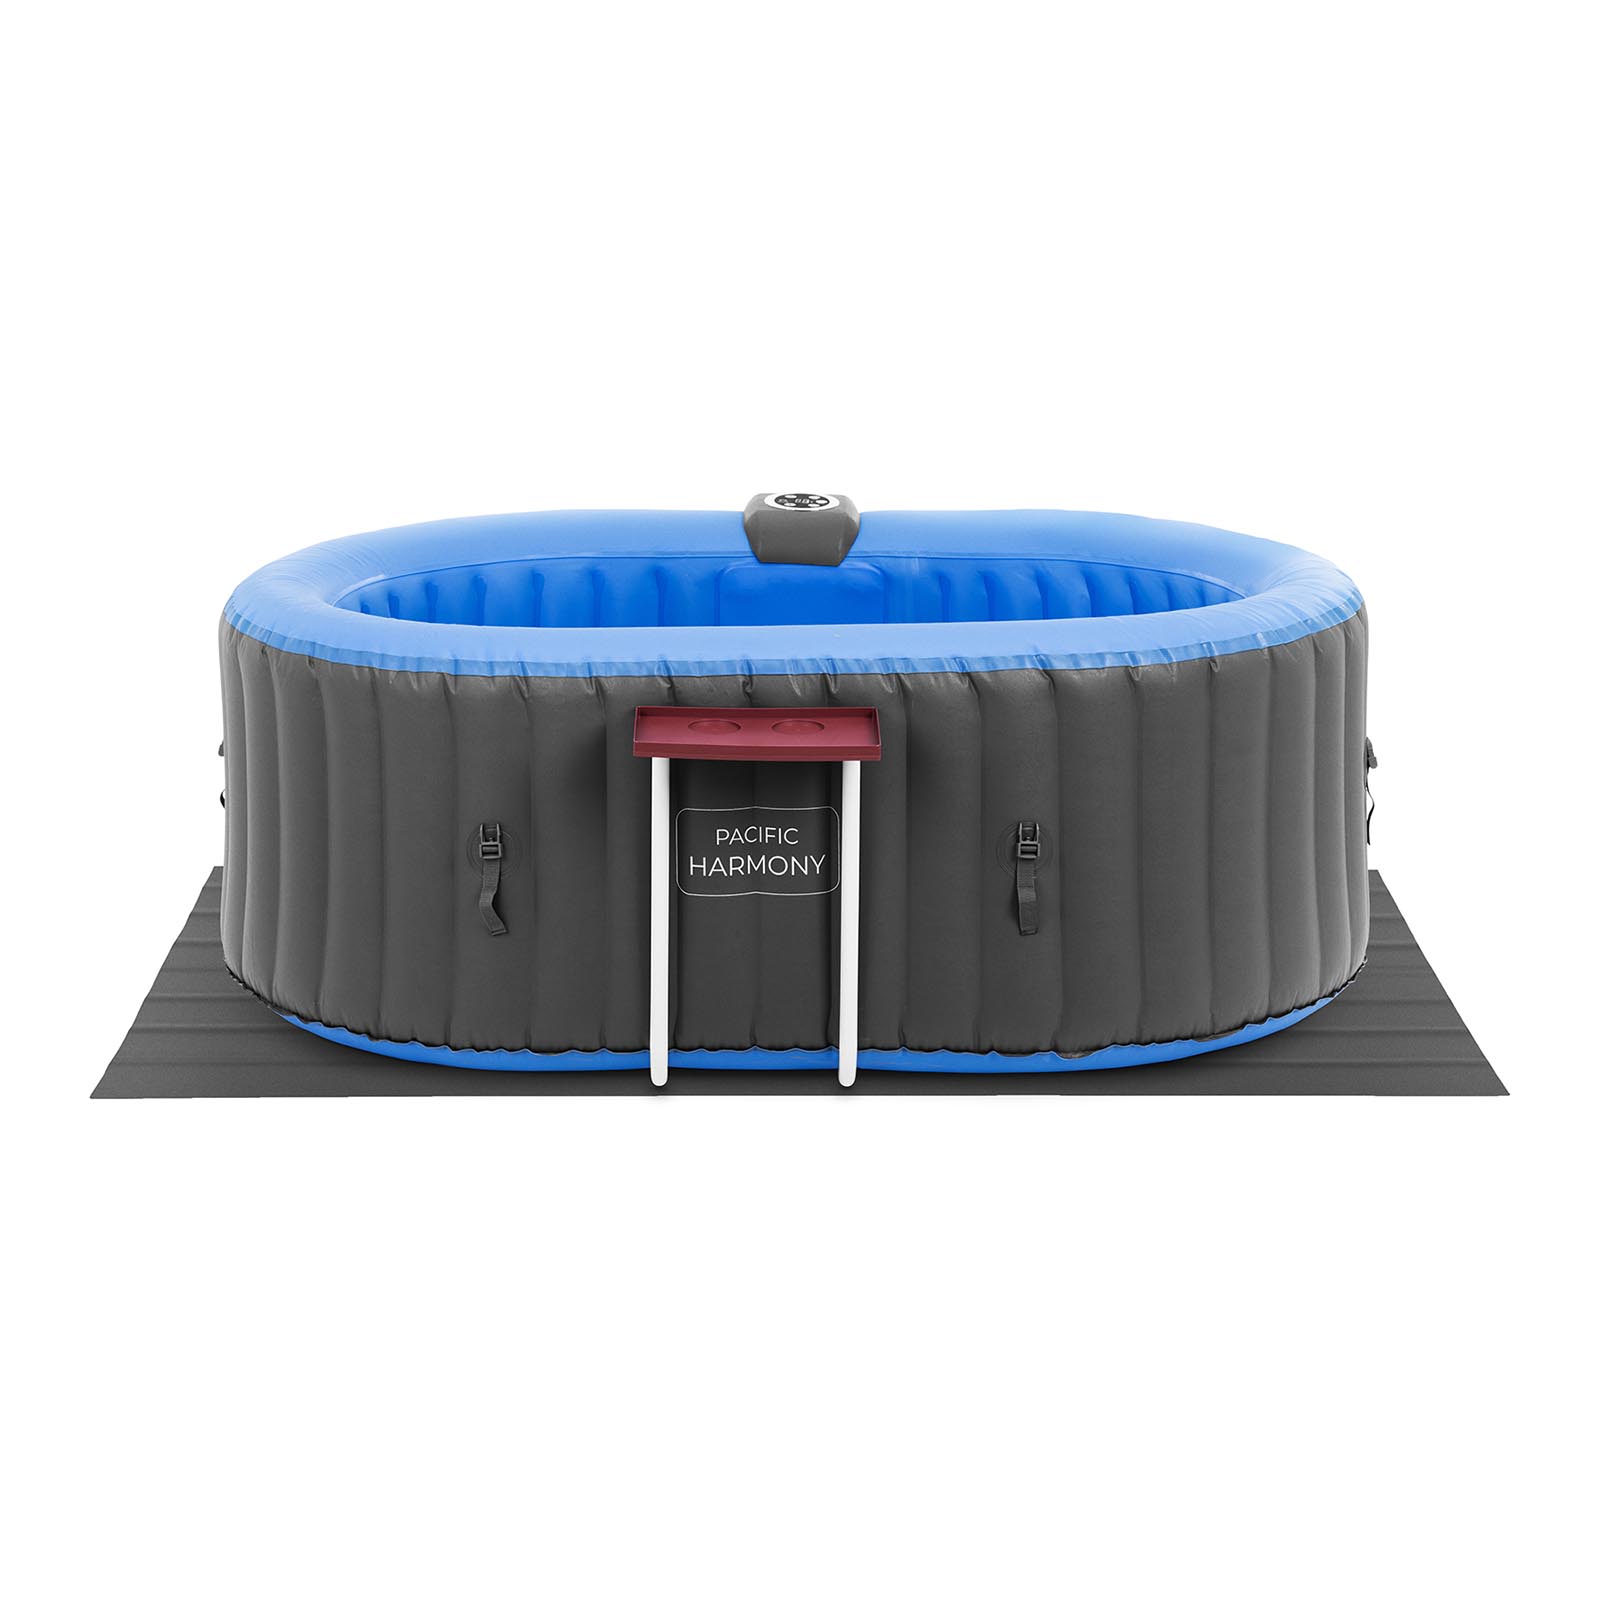 Inflatable Hot Tub - 550 l - 2 person - 100 jets